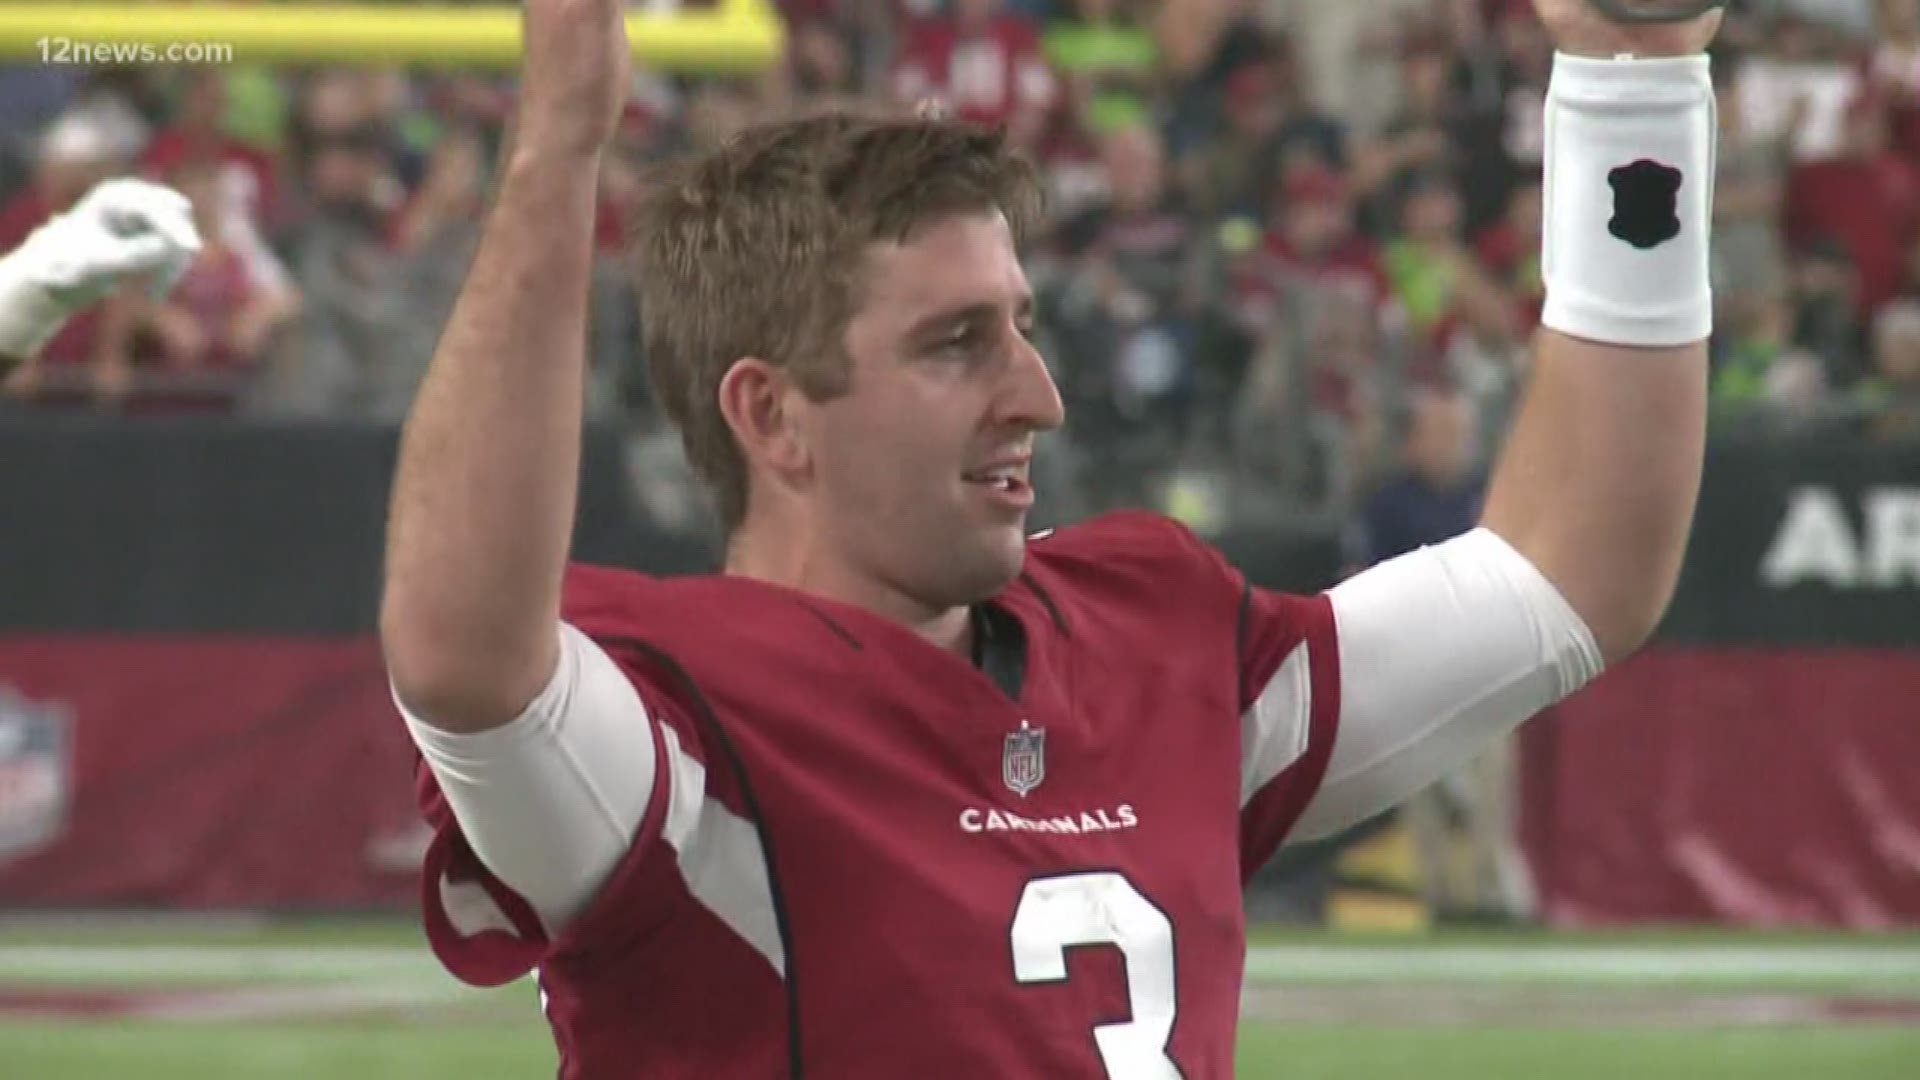 Arizona traded away former first round pick, QB Josh Rosen to Miami for a late-second round pick. This comes after the team took QB Kyler Murray No. 1 overall Thursday.